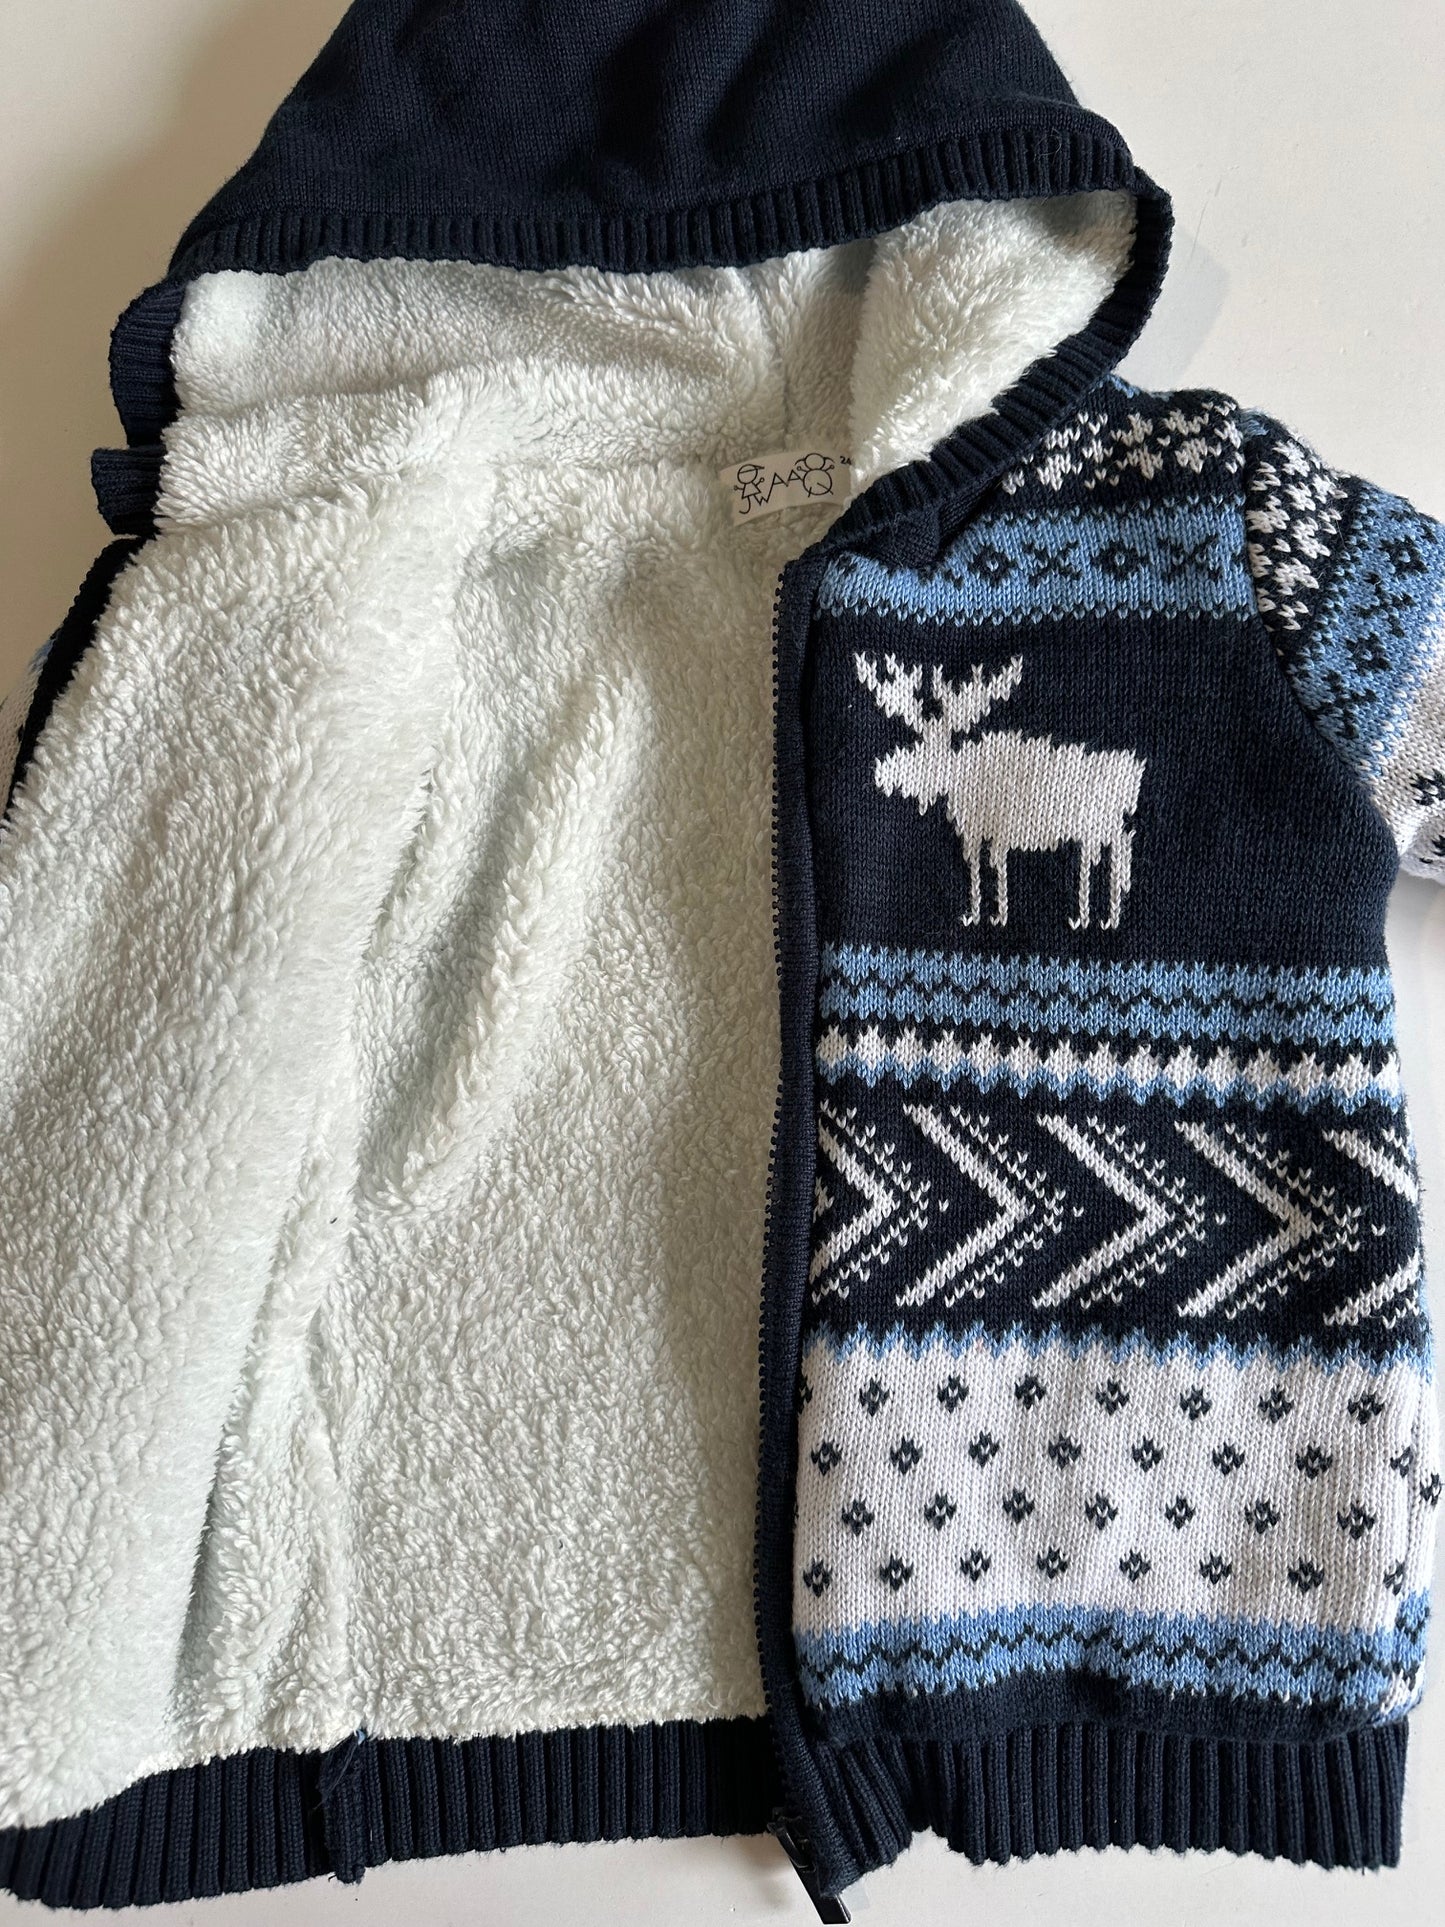 Unknown Brand, Blue and White Cozy-Lined Zip-Up Hooded Sweater - 24 Months